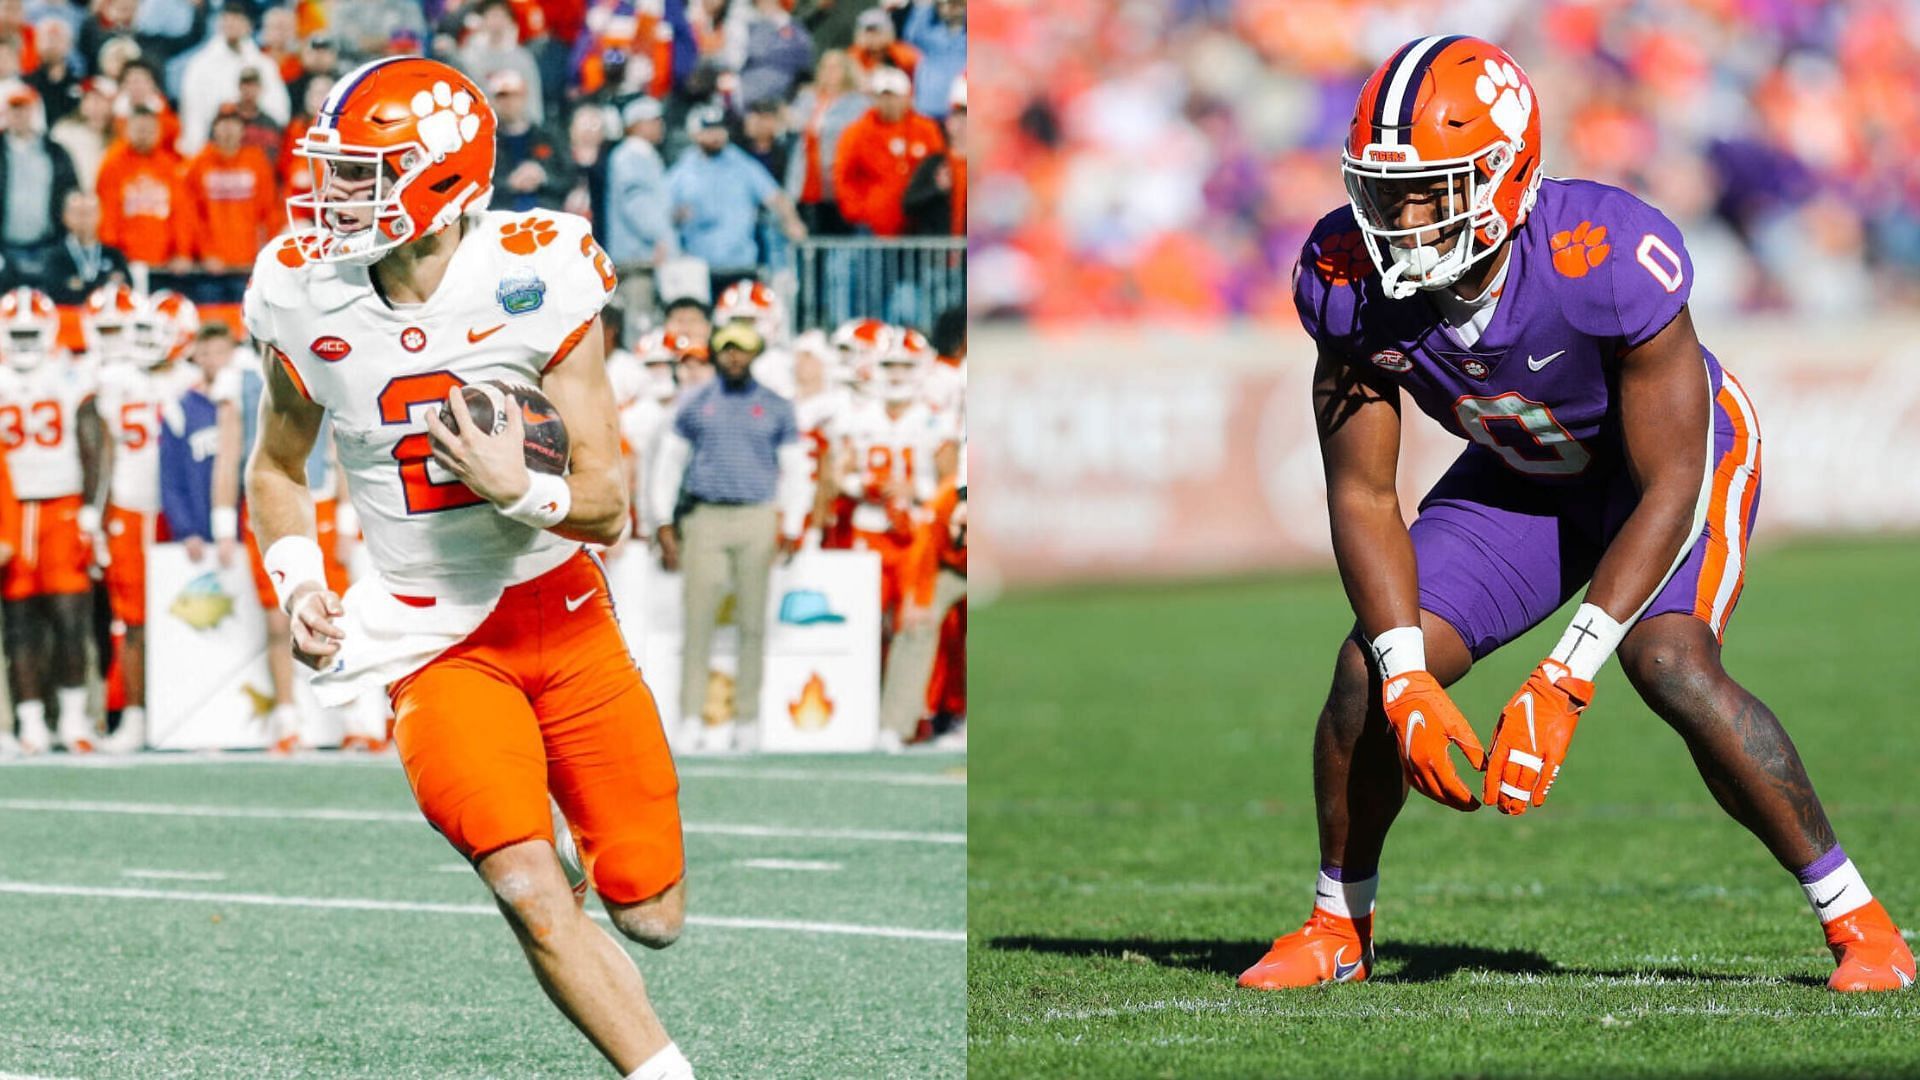 Top Clemson Players in College Football 25 video game ft. Cade Klubnik, Phil Mafah and more